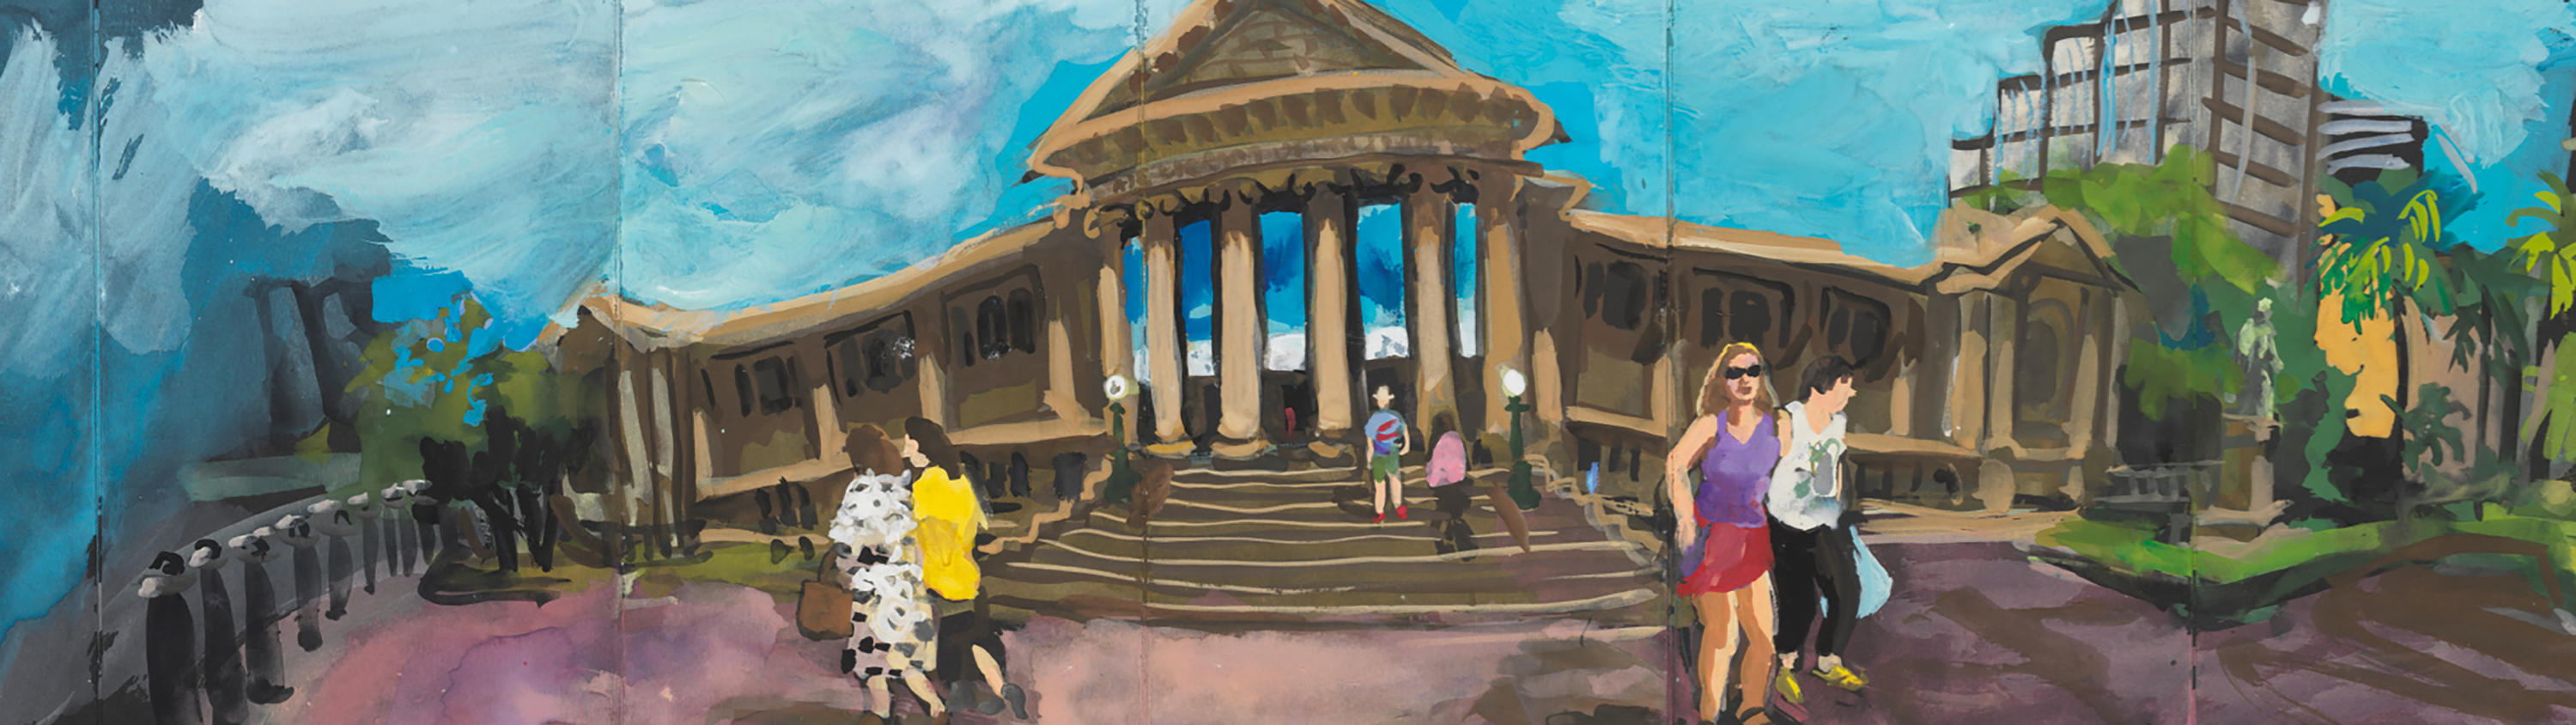 Crop of Wendy Sharpes painting of the Mitchell Library